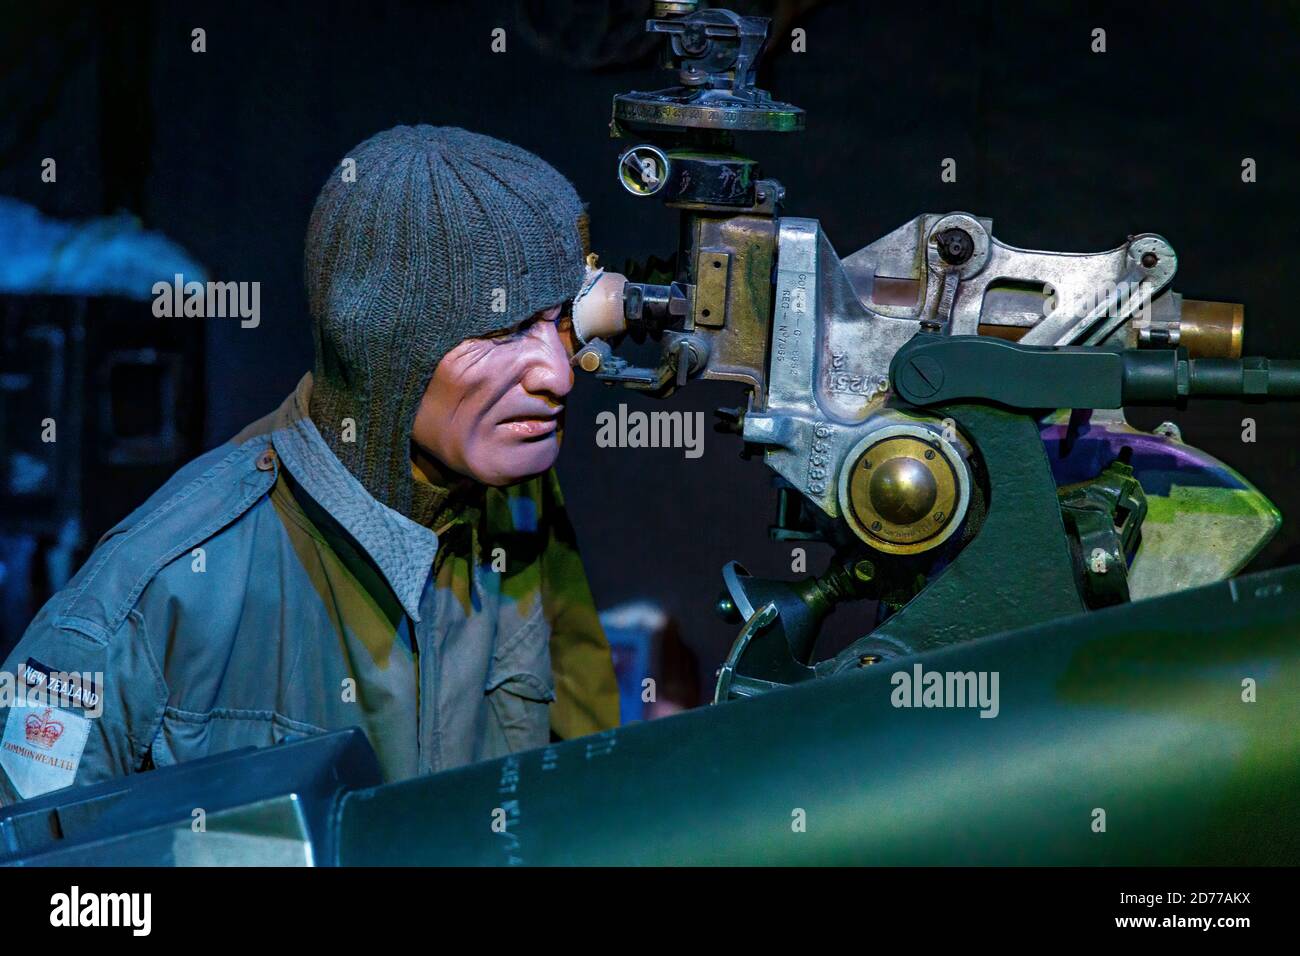 National Army Museum in Waiouru, North Island, New Zealand. Diorama of soldier aiming a howitzer gun in Korea. Stock Photo